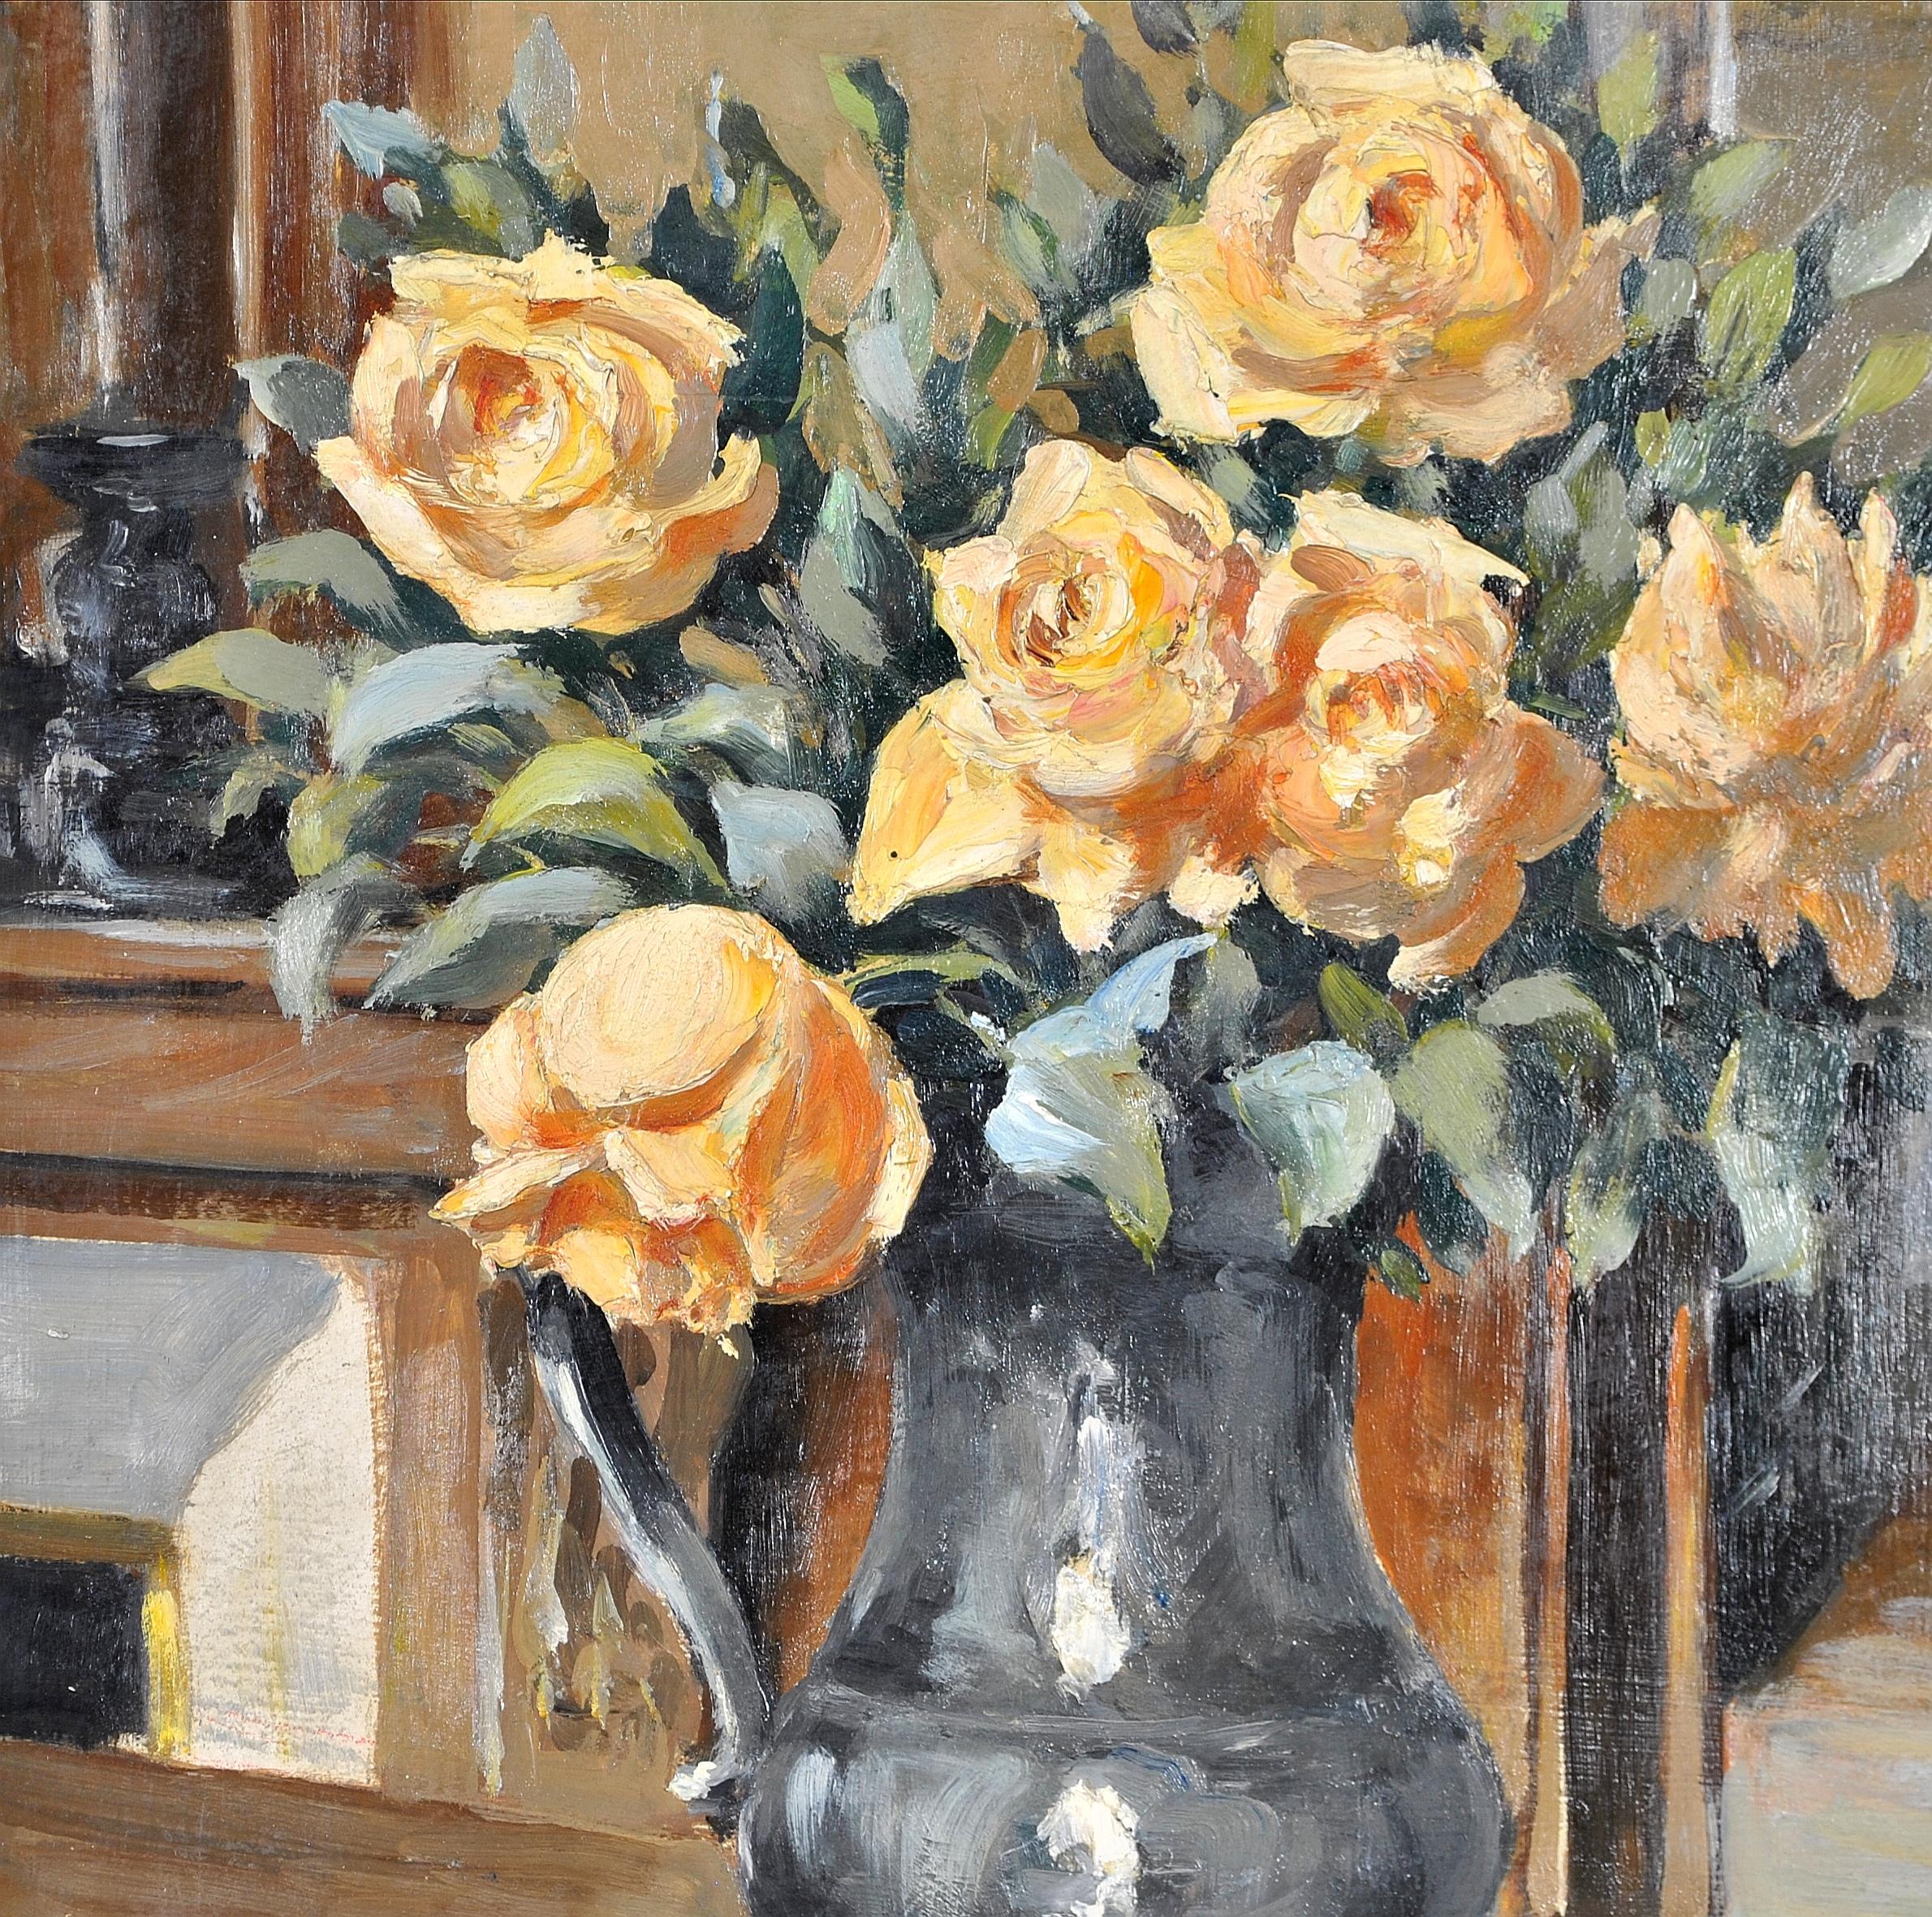 A beautiful 1920's French impressionist oil on board interior still life with yellow roses in a jug. Excellent quality work with lots of detail including a painting on the wall and mirror over the fireplace. Presented in a painted and gilded